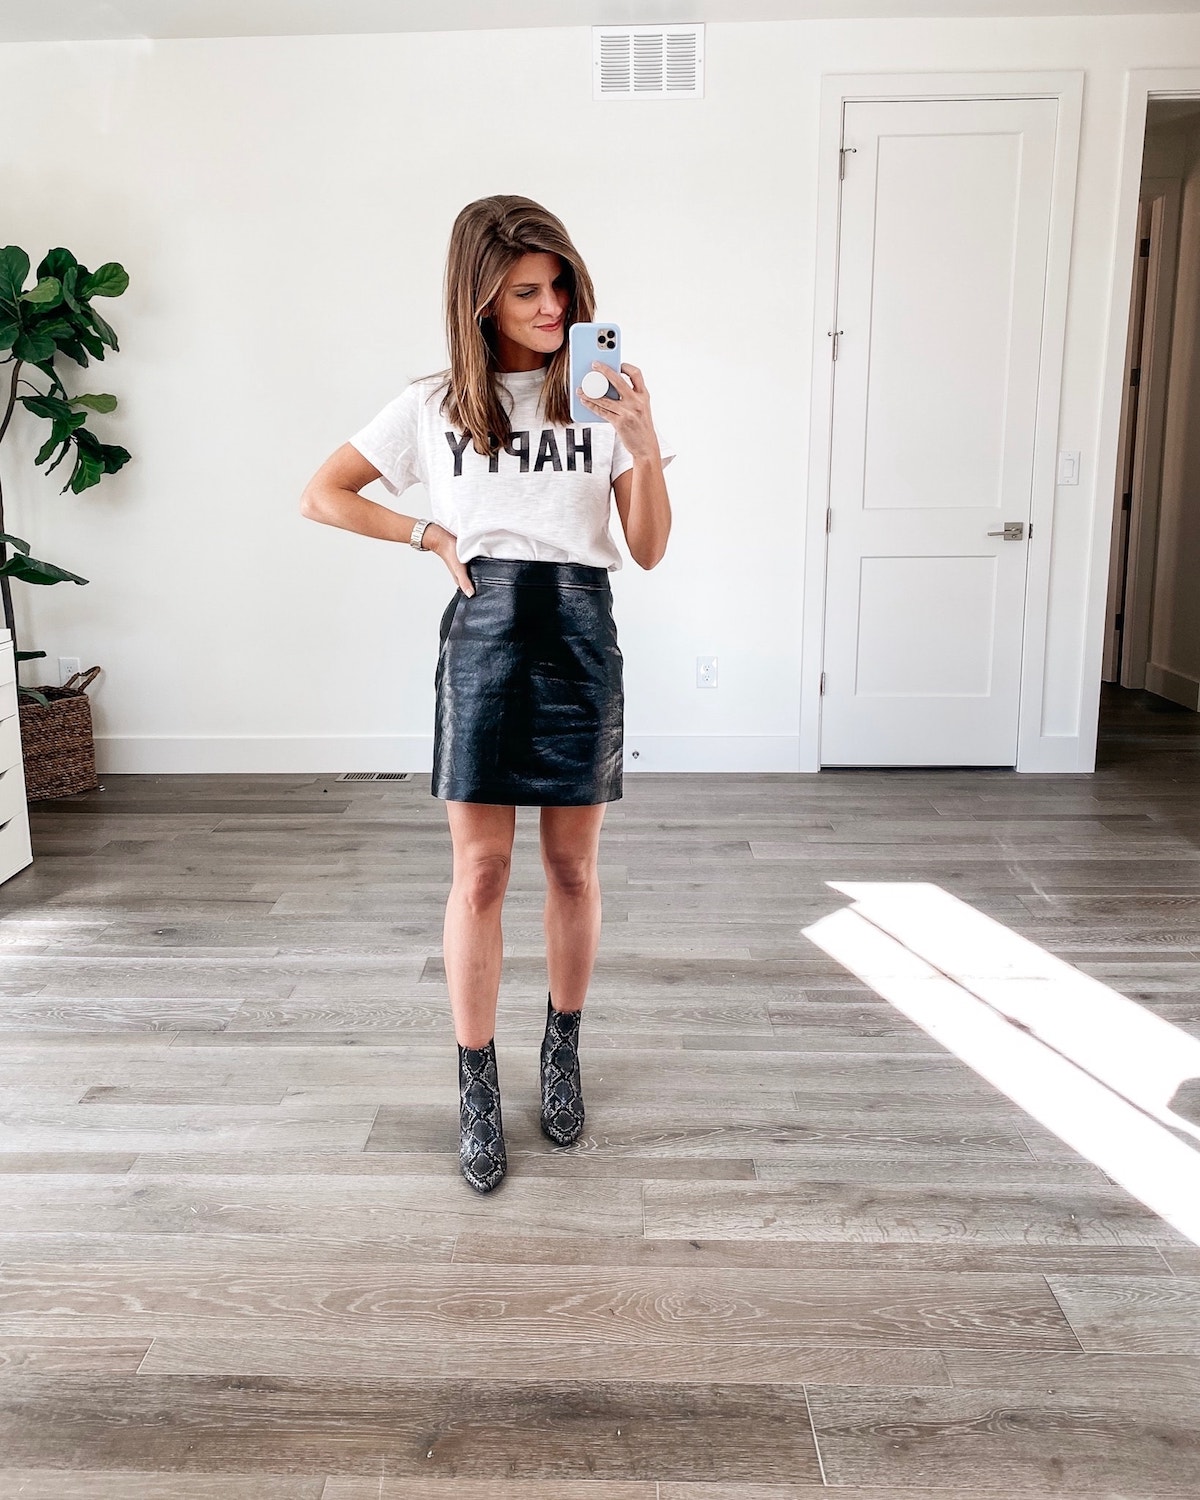 Brighton Keller wearing Leith faux leather skirt, happy tee and snakeskin booties